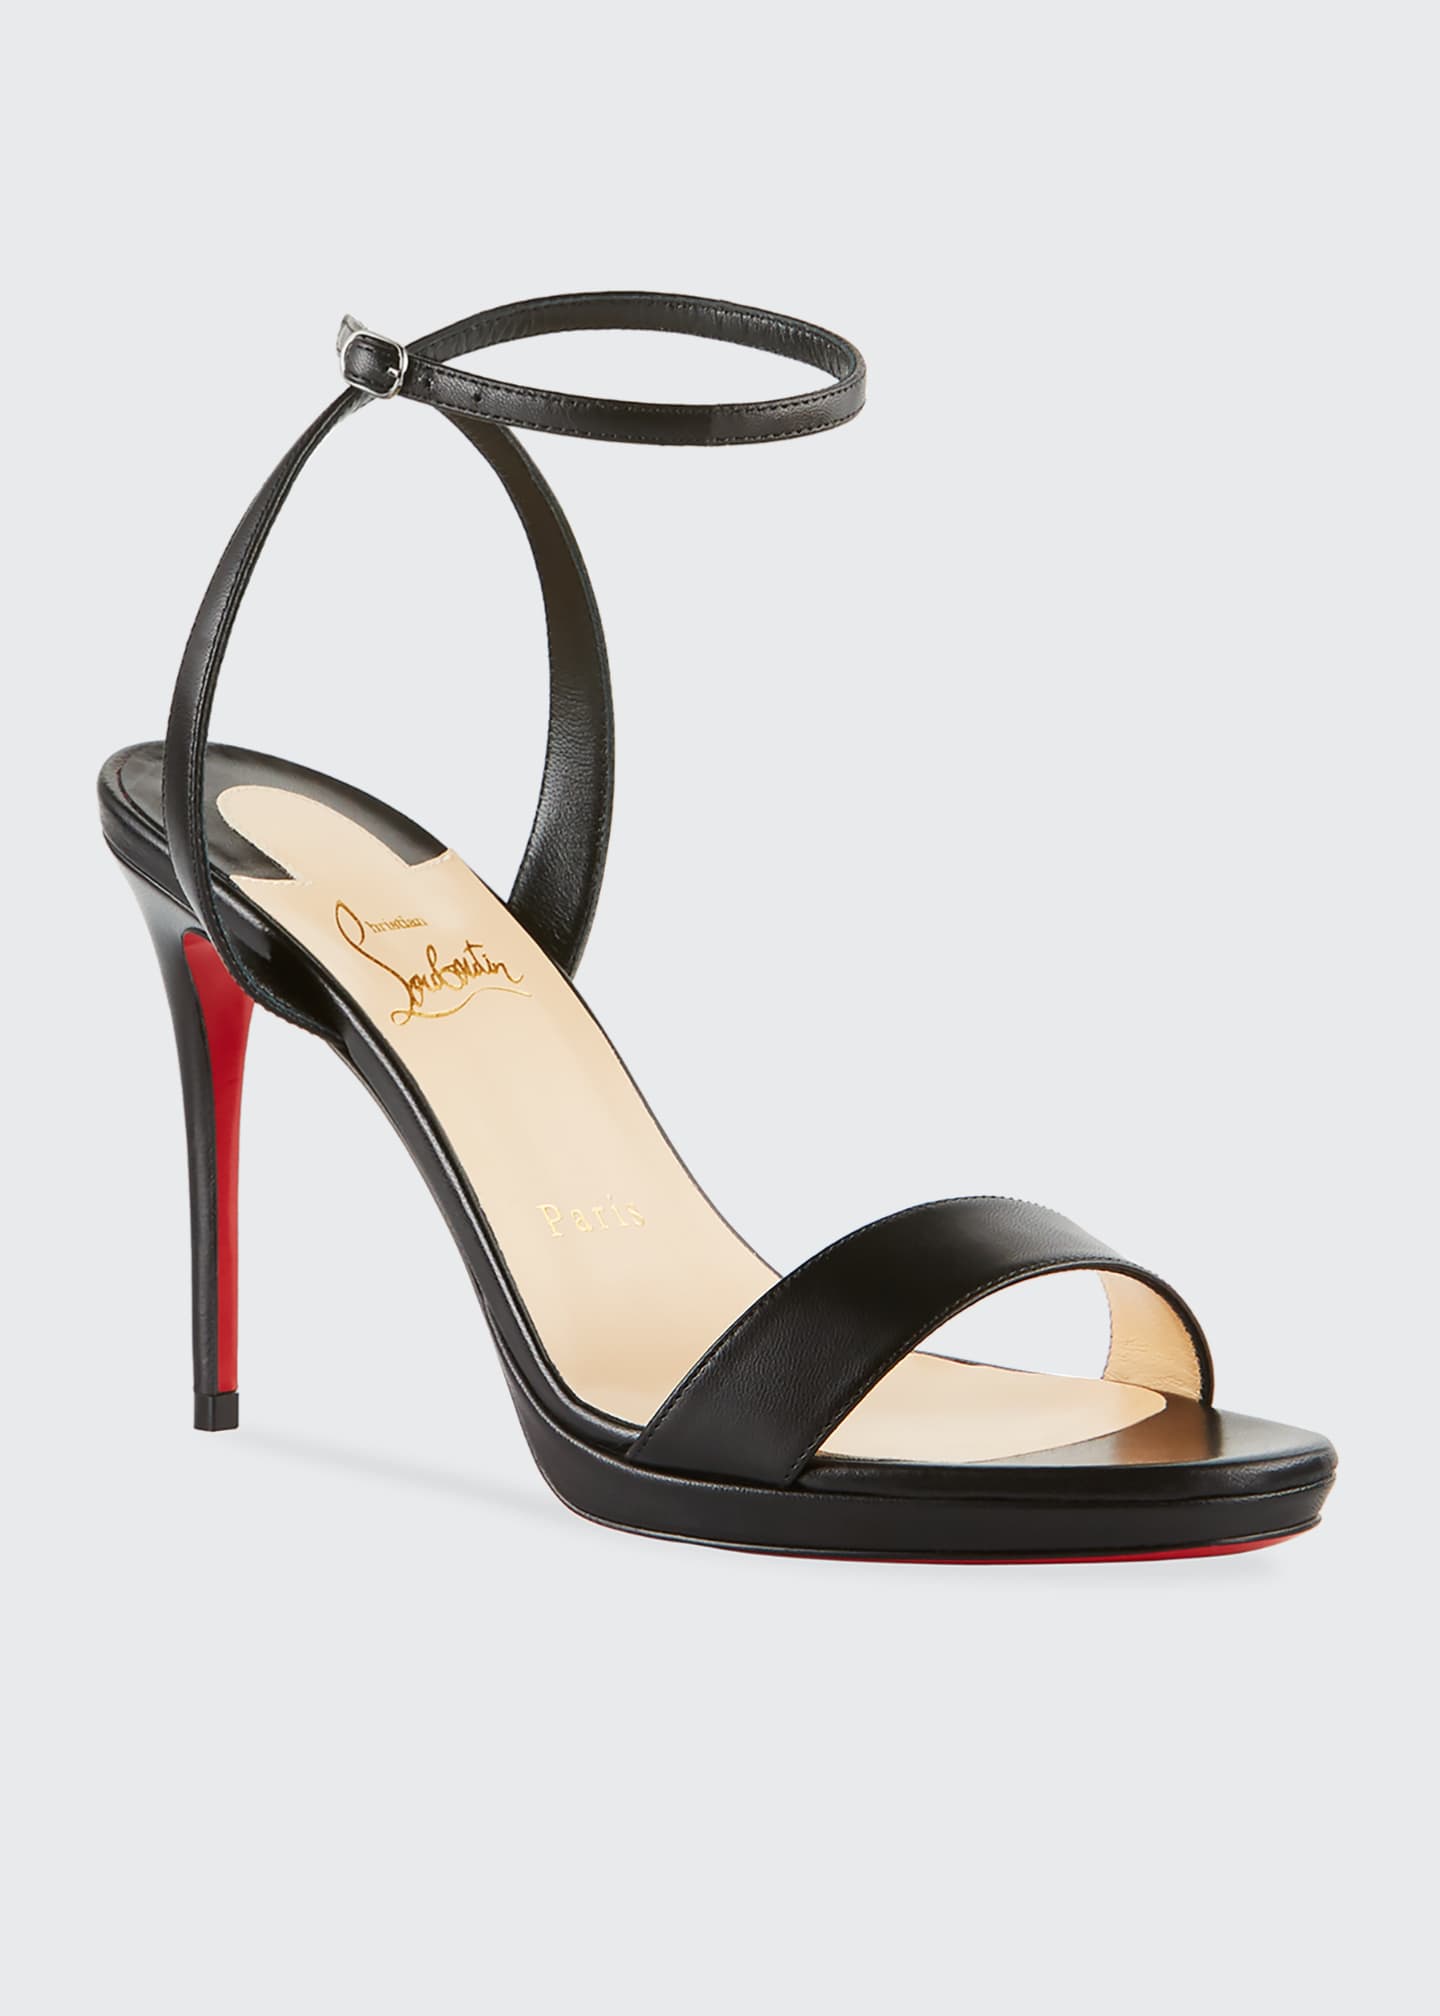 Christian Louboutin Loubi Queen Red Sole Ankle-Wrap Sandals - Bergdorf ...